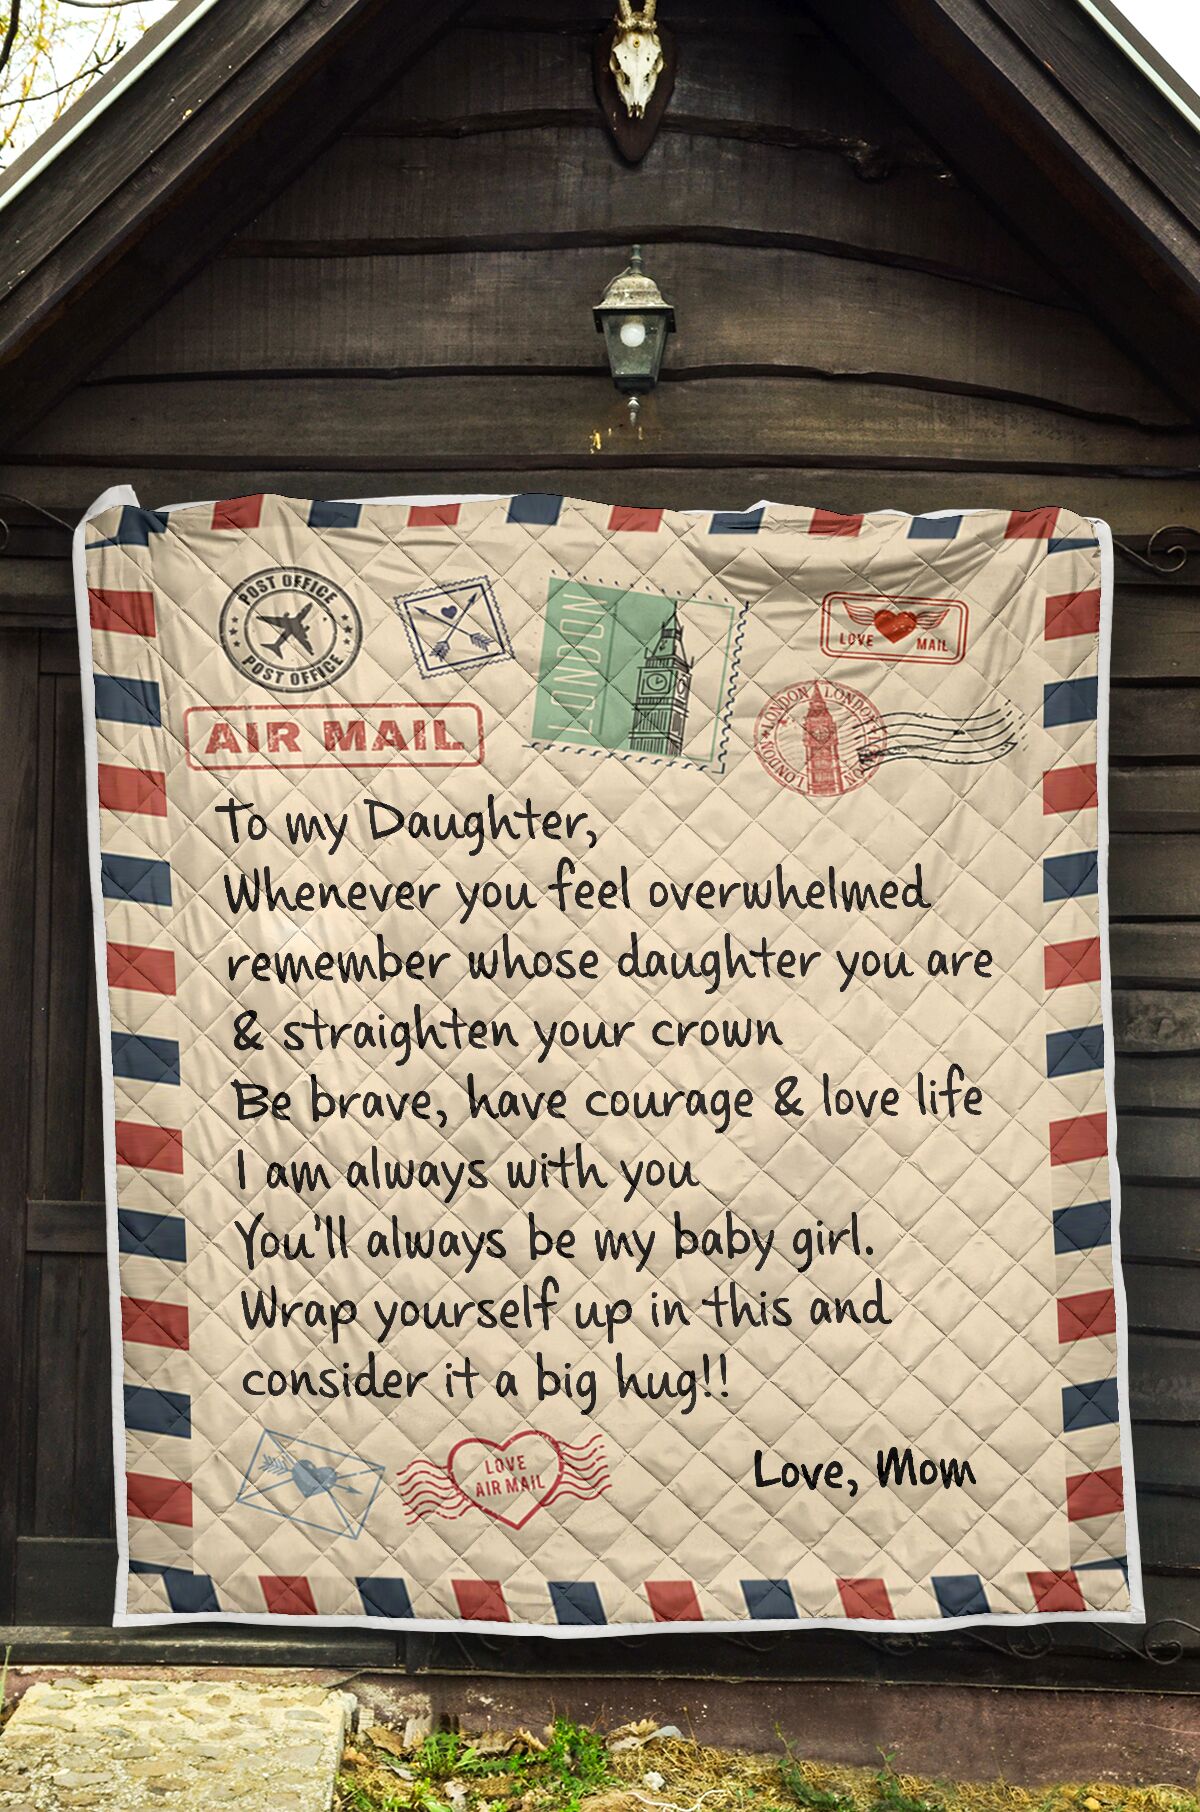 Air mail to my daughter quilt blanket